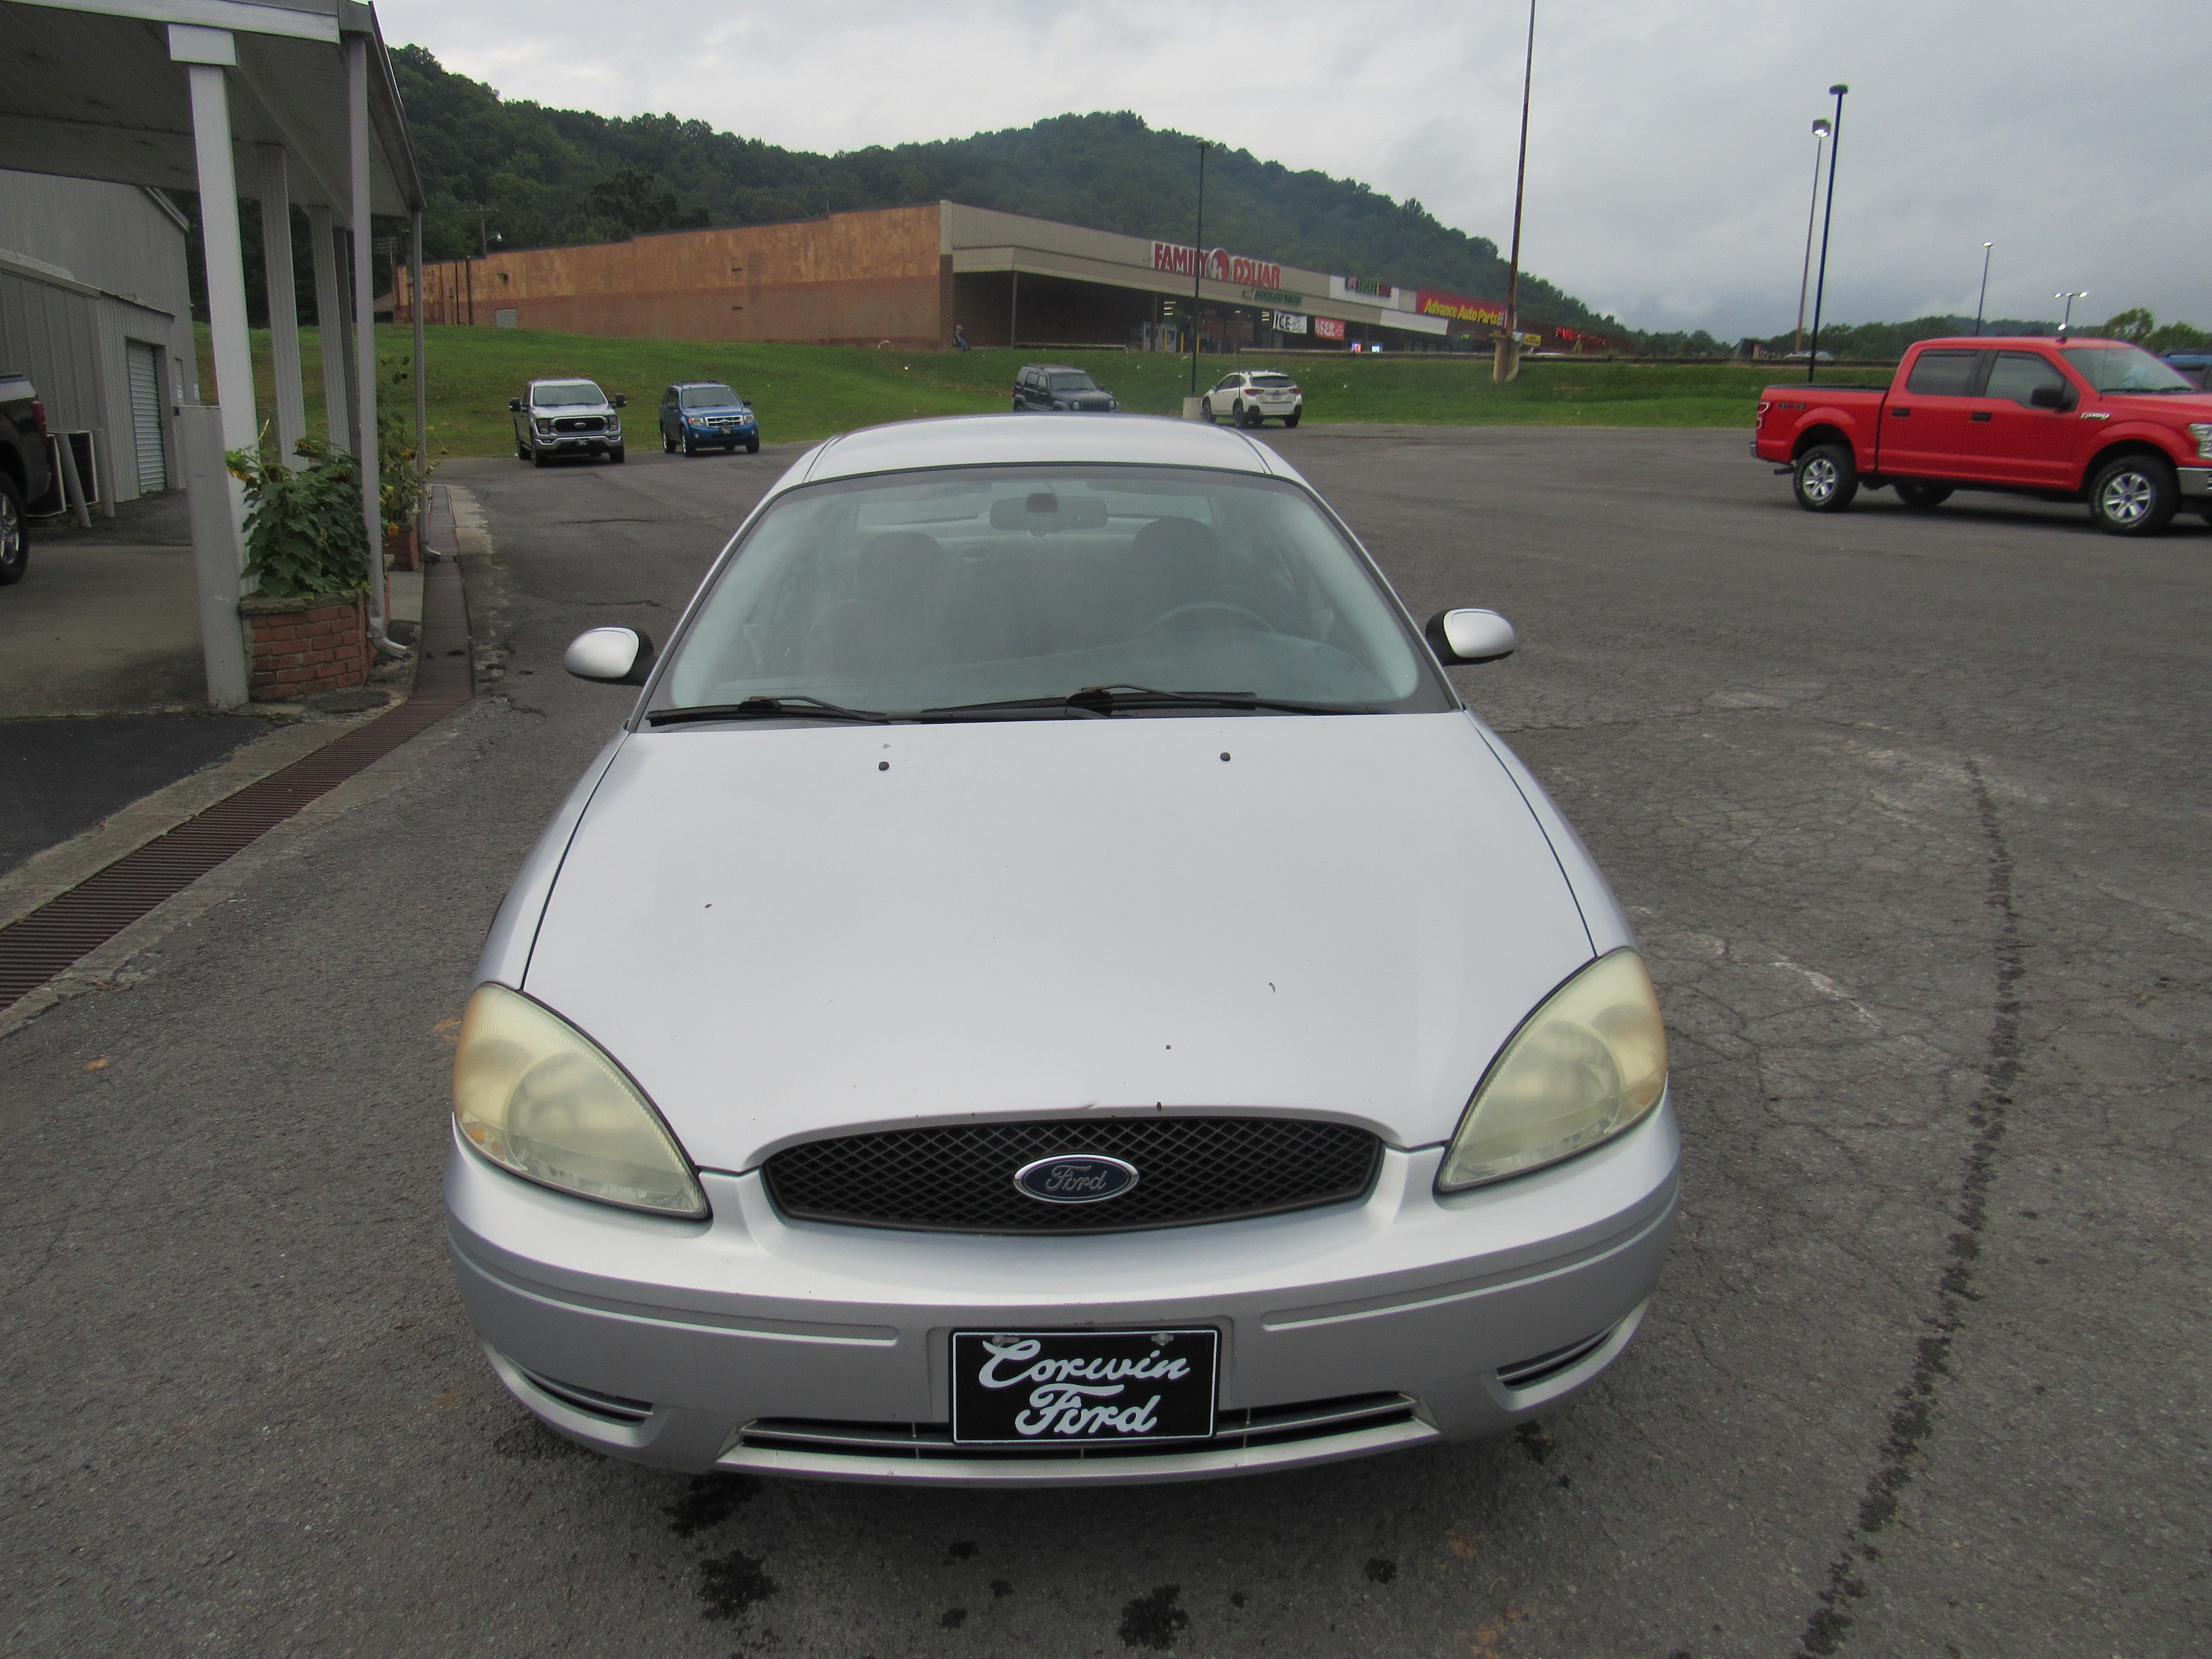 Used 2007 Ford Taurus SEL with VIN 1FAFP56U37A151860 for sale in Mannington, WV